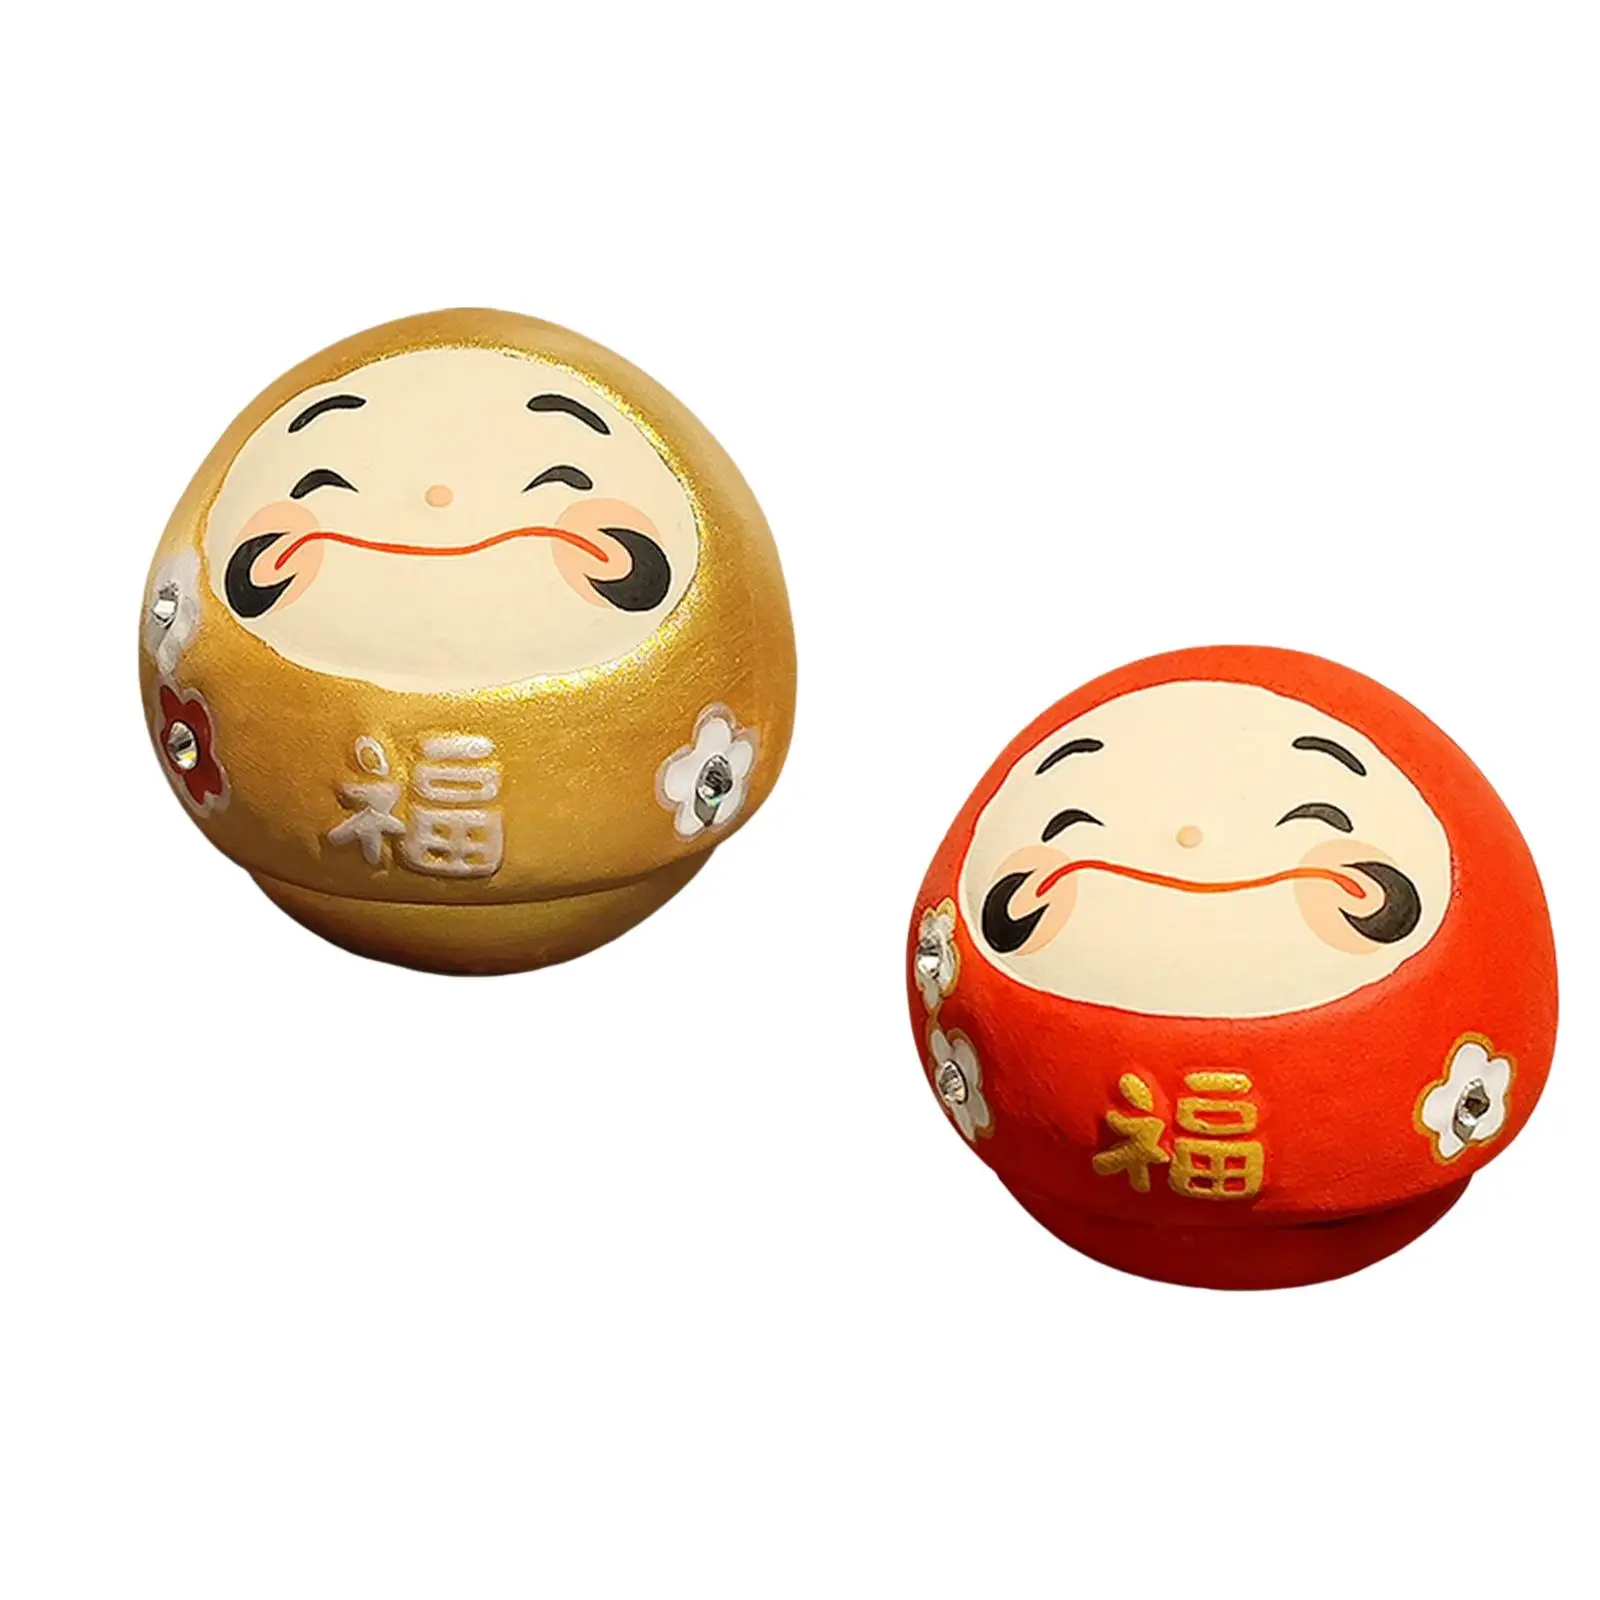 Cute Desktop Figurines Creative Tabletop Gifts Hand Painted Sculpture Decoration for Living Room Cabinet Home Office